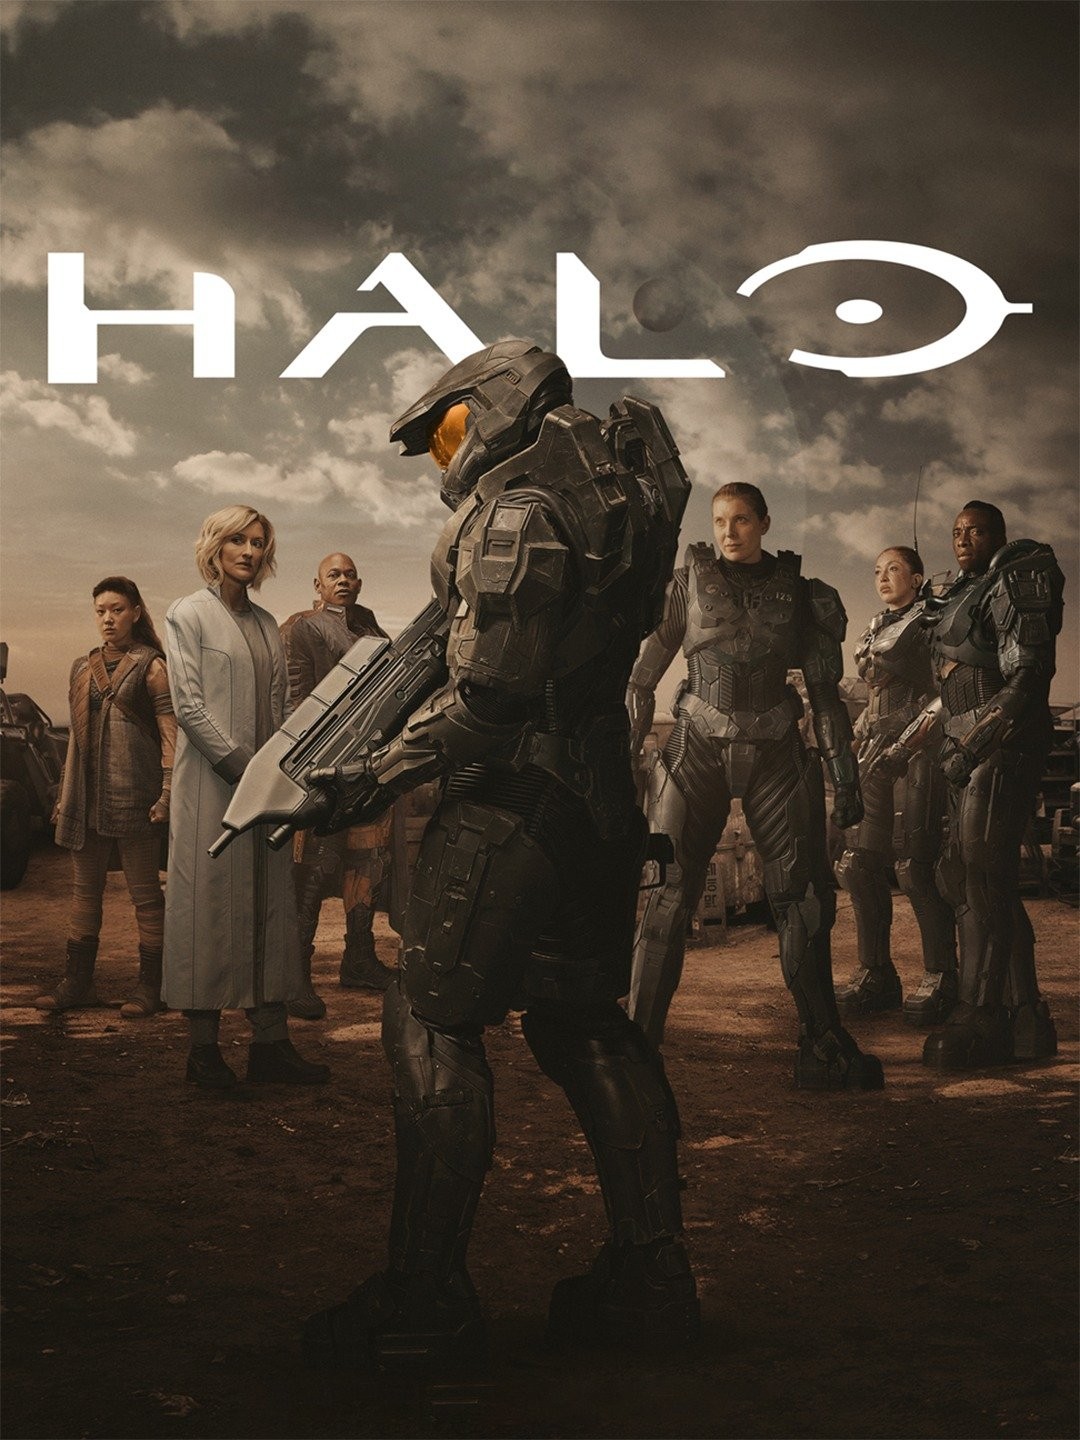 What you see if you Google the Halo tv show : r/halo